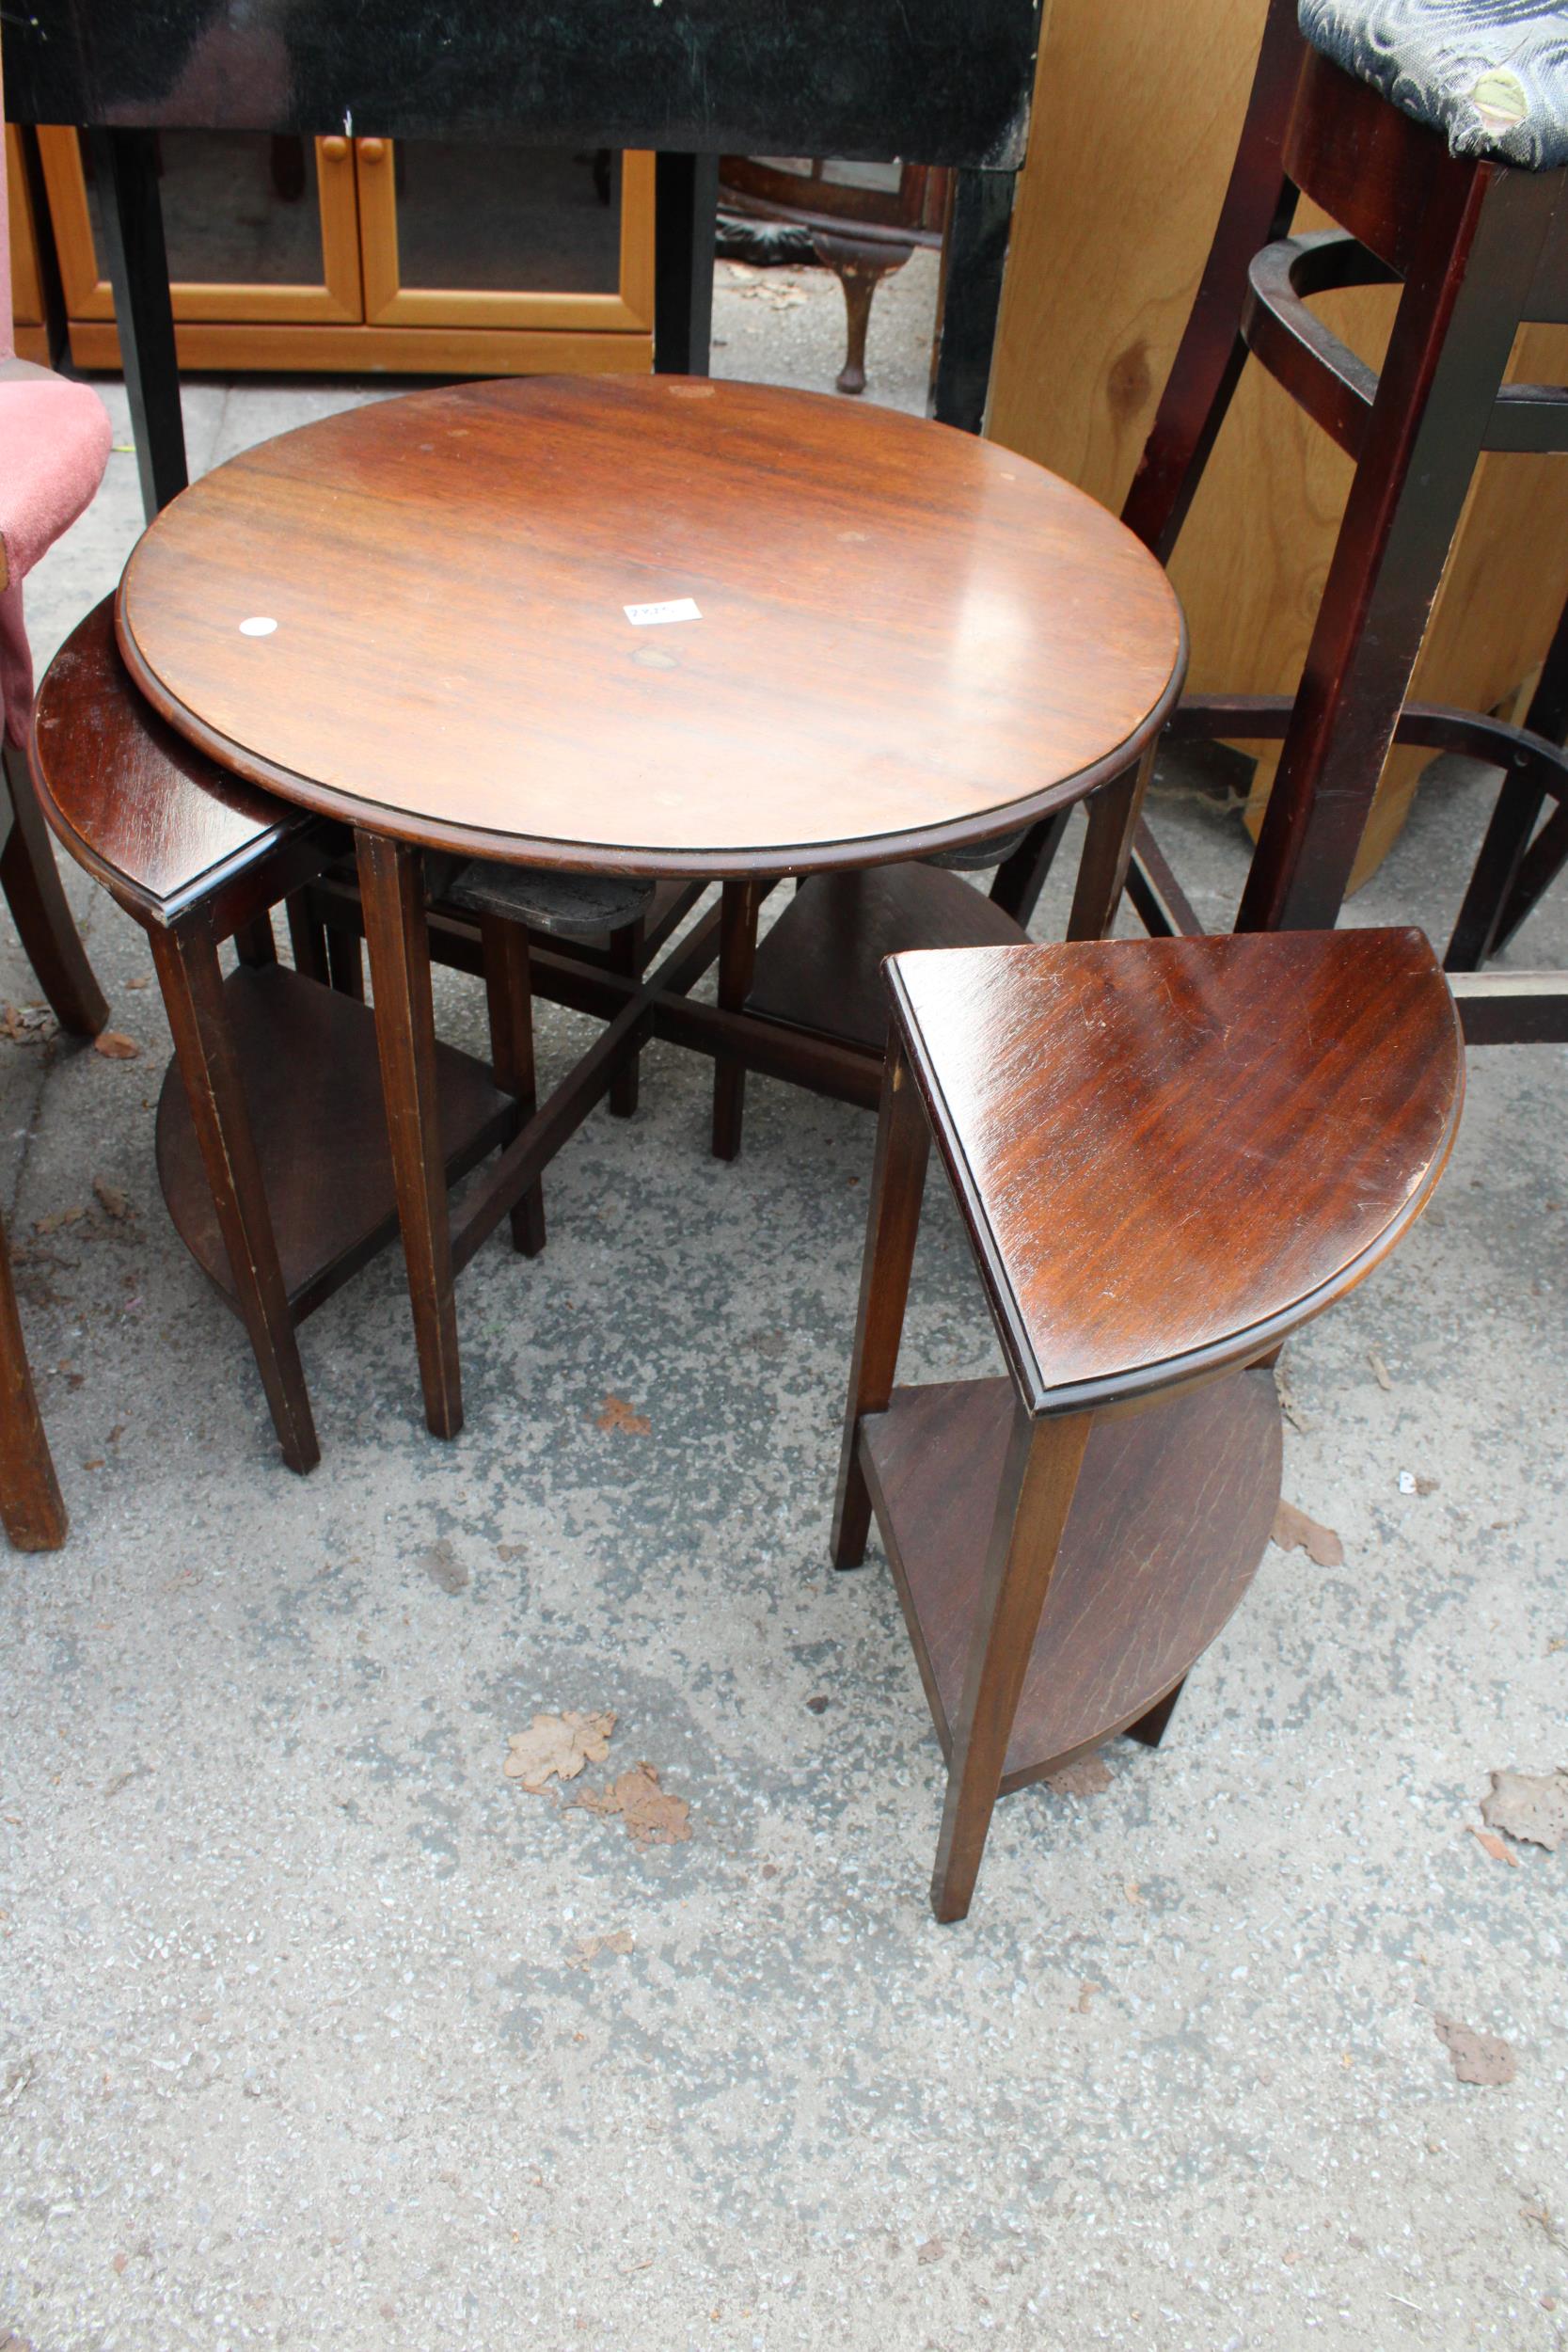 A MID 20TH CENTURY 23.5" DIAMETER NEST OF FIVE TABLES - Image 2 of 3